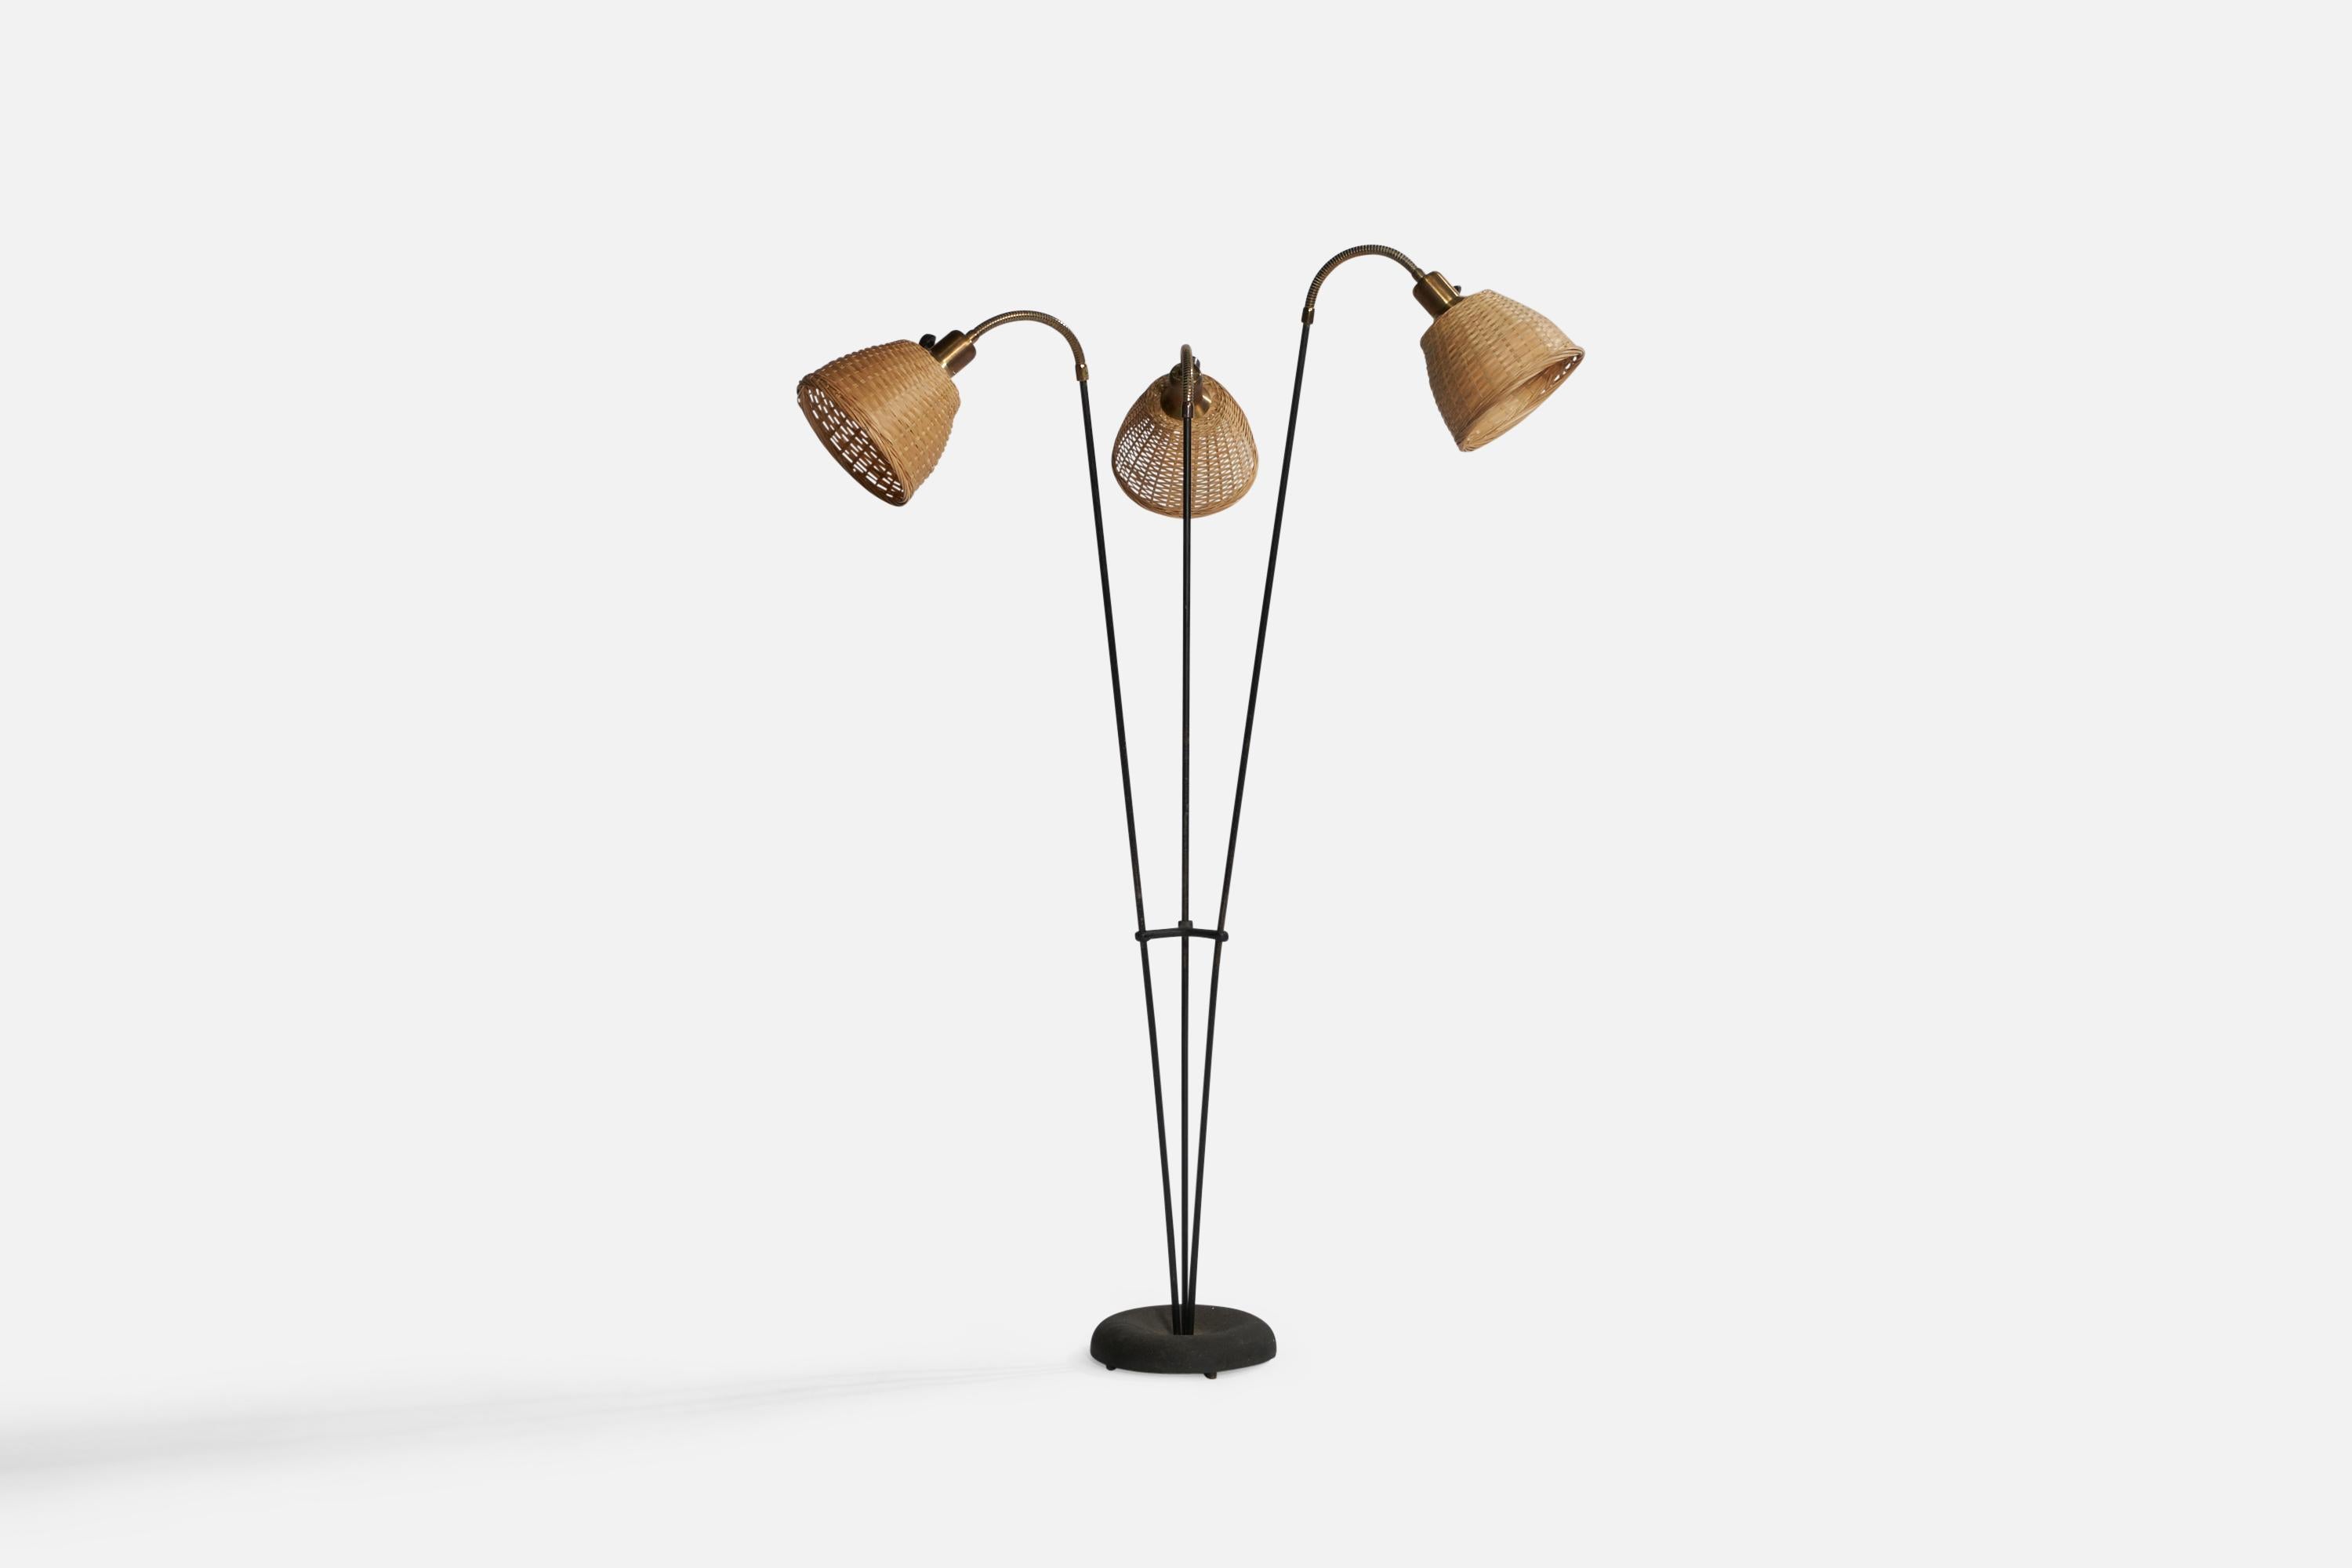 A brass and black-lacquered metal floor lamp designed and produced in Sweden, c. 1950s.

Overall Dimensions (inches): 51.8” H x 30.4” W x 25” D. Stated dimensions include shade.
Dimensions vary based on position of lights
Bulb Specifications: E-26